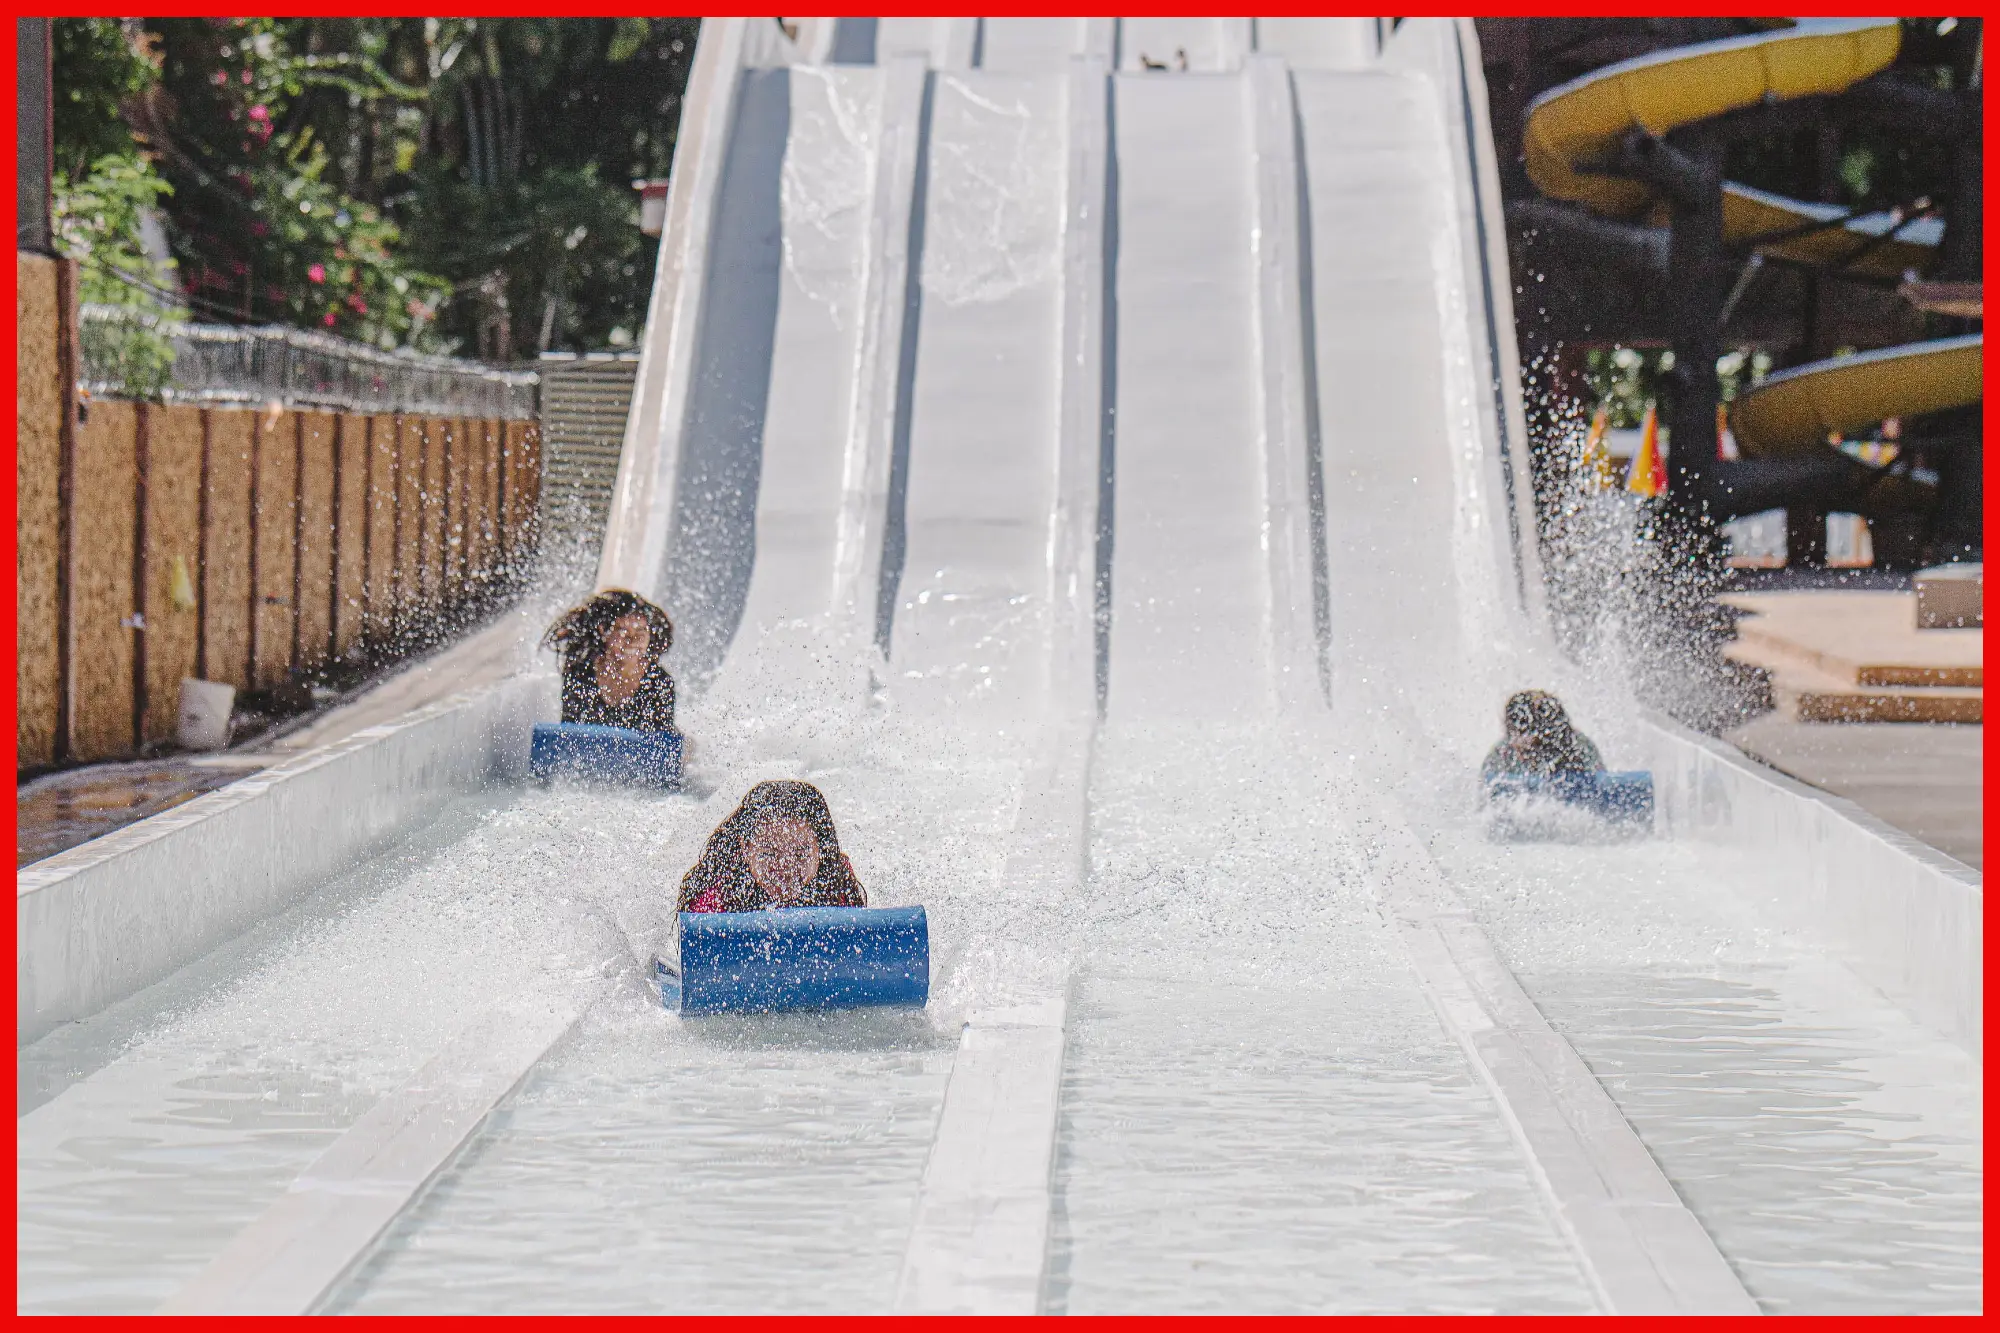 Excited riders descend a water slide making a big splash at the bottom, conveying the joy and excitement of a water park adventure